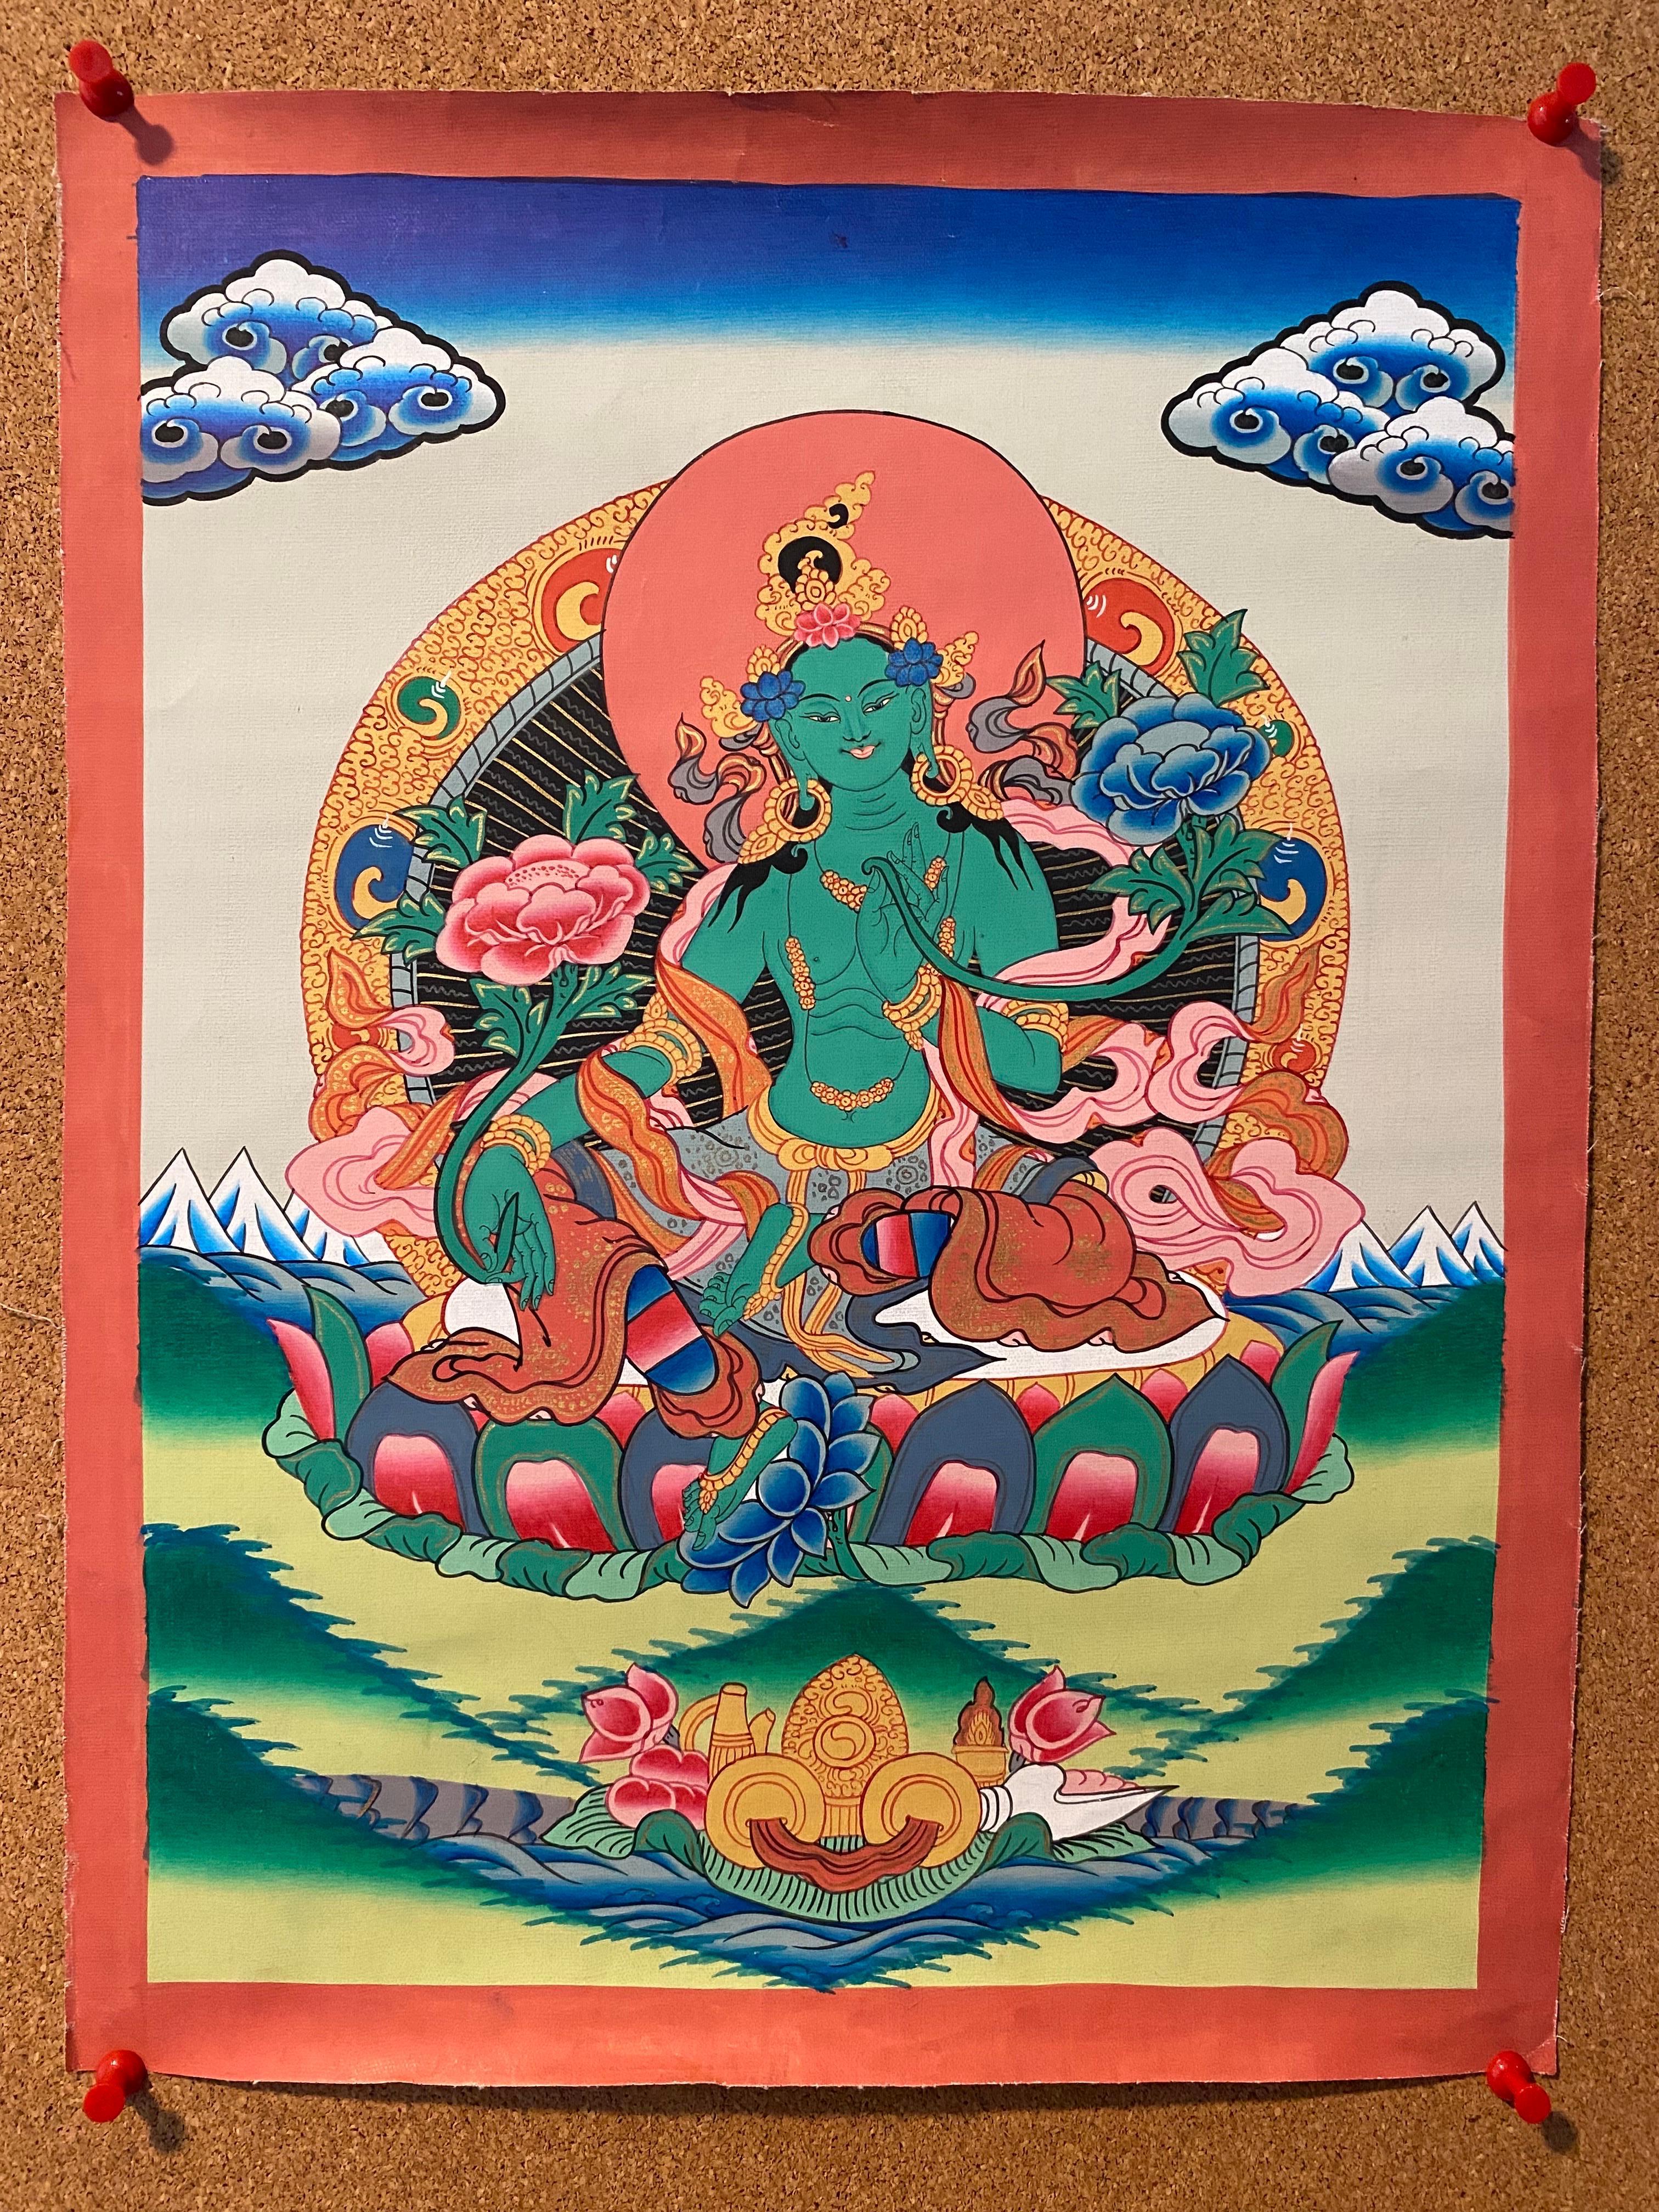 Unframed Hand Painted Green Tara Thangka on Canvas 24K Gold - Other Art Style Painting by Unknown